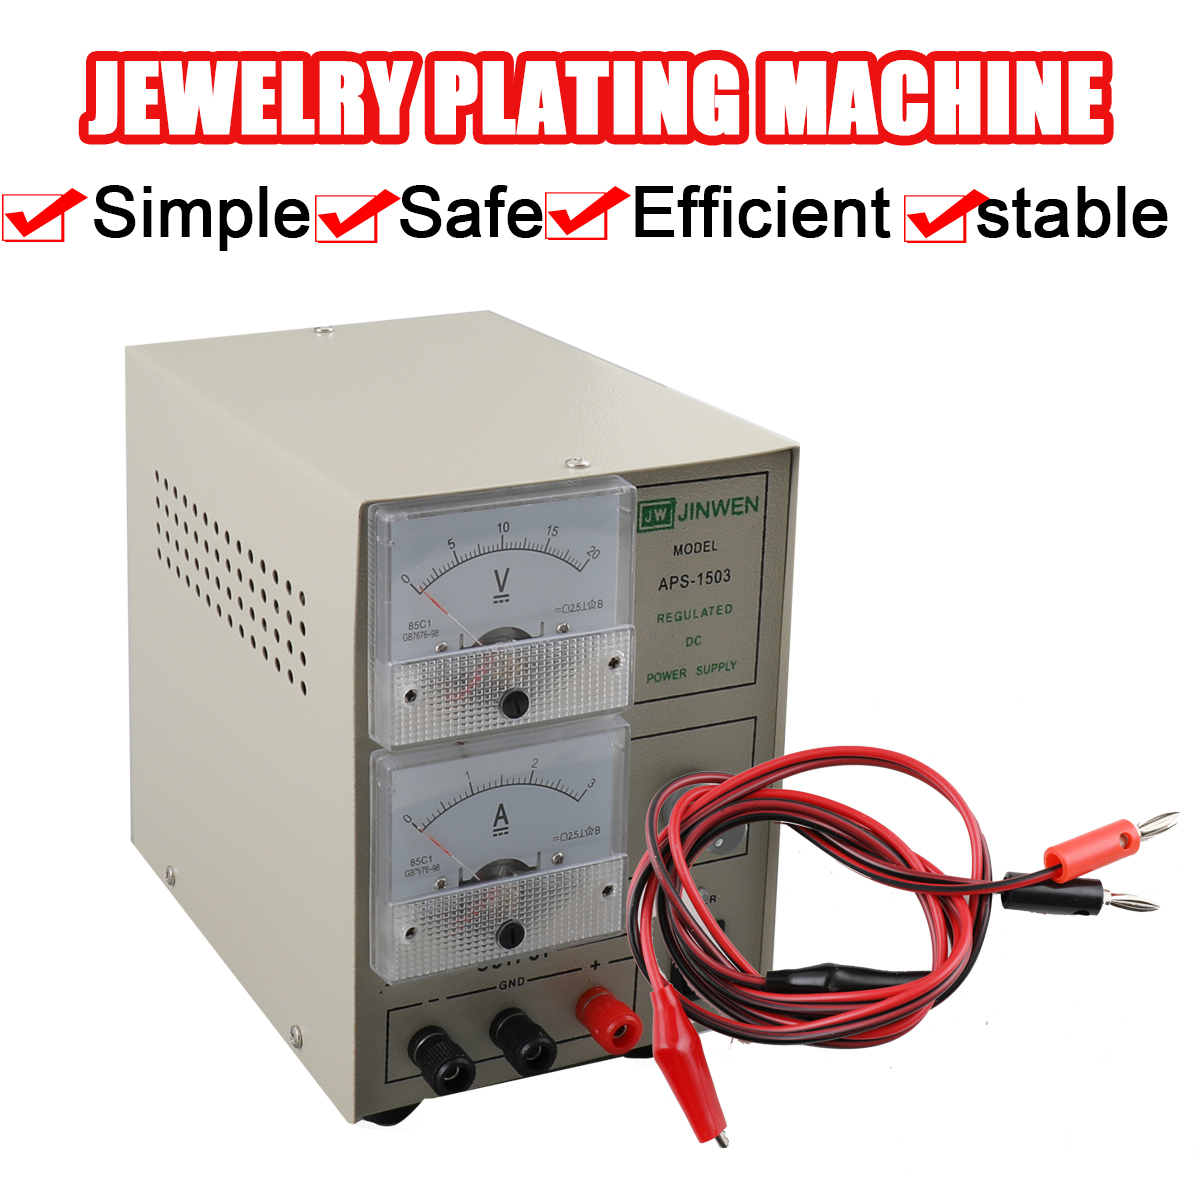 ECUTEE Gold Plating Kit 3A Electric Gold Jewelry Plating Machine Gold  Silver Electroplating Machine Tool 